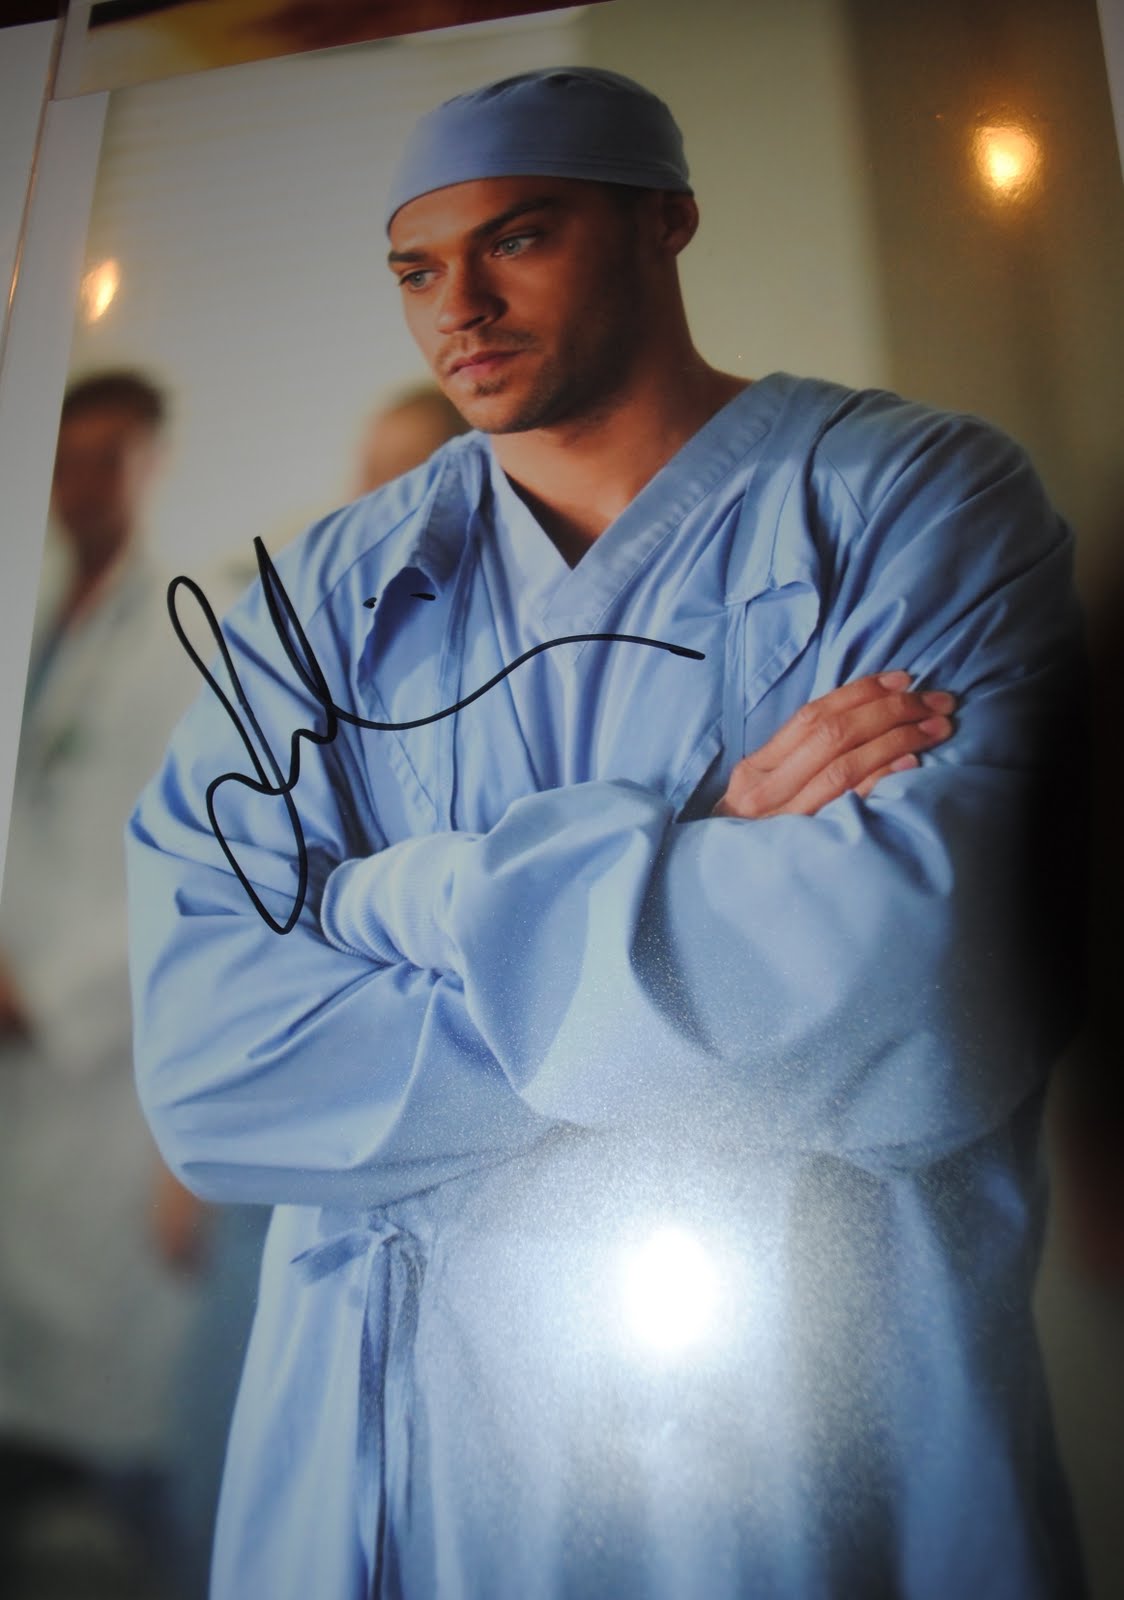 Caput Draconis: Autographs - Actors (Recently Added: TR KNIGHT!)1124 x 1600